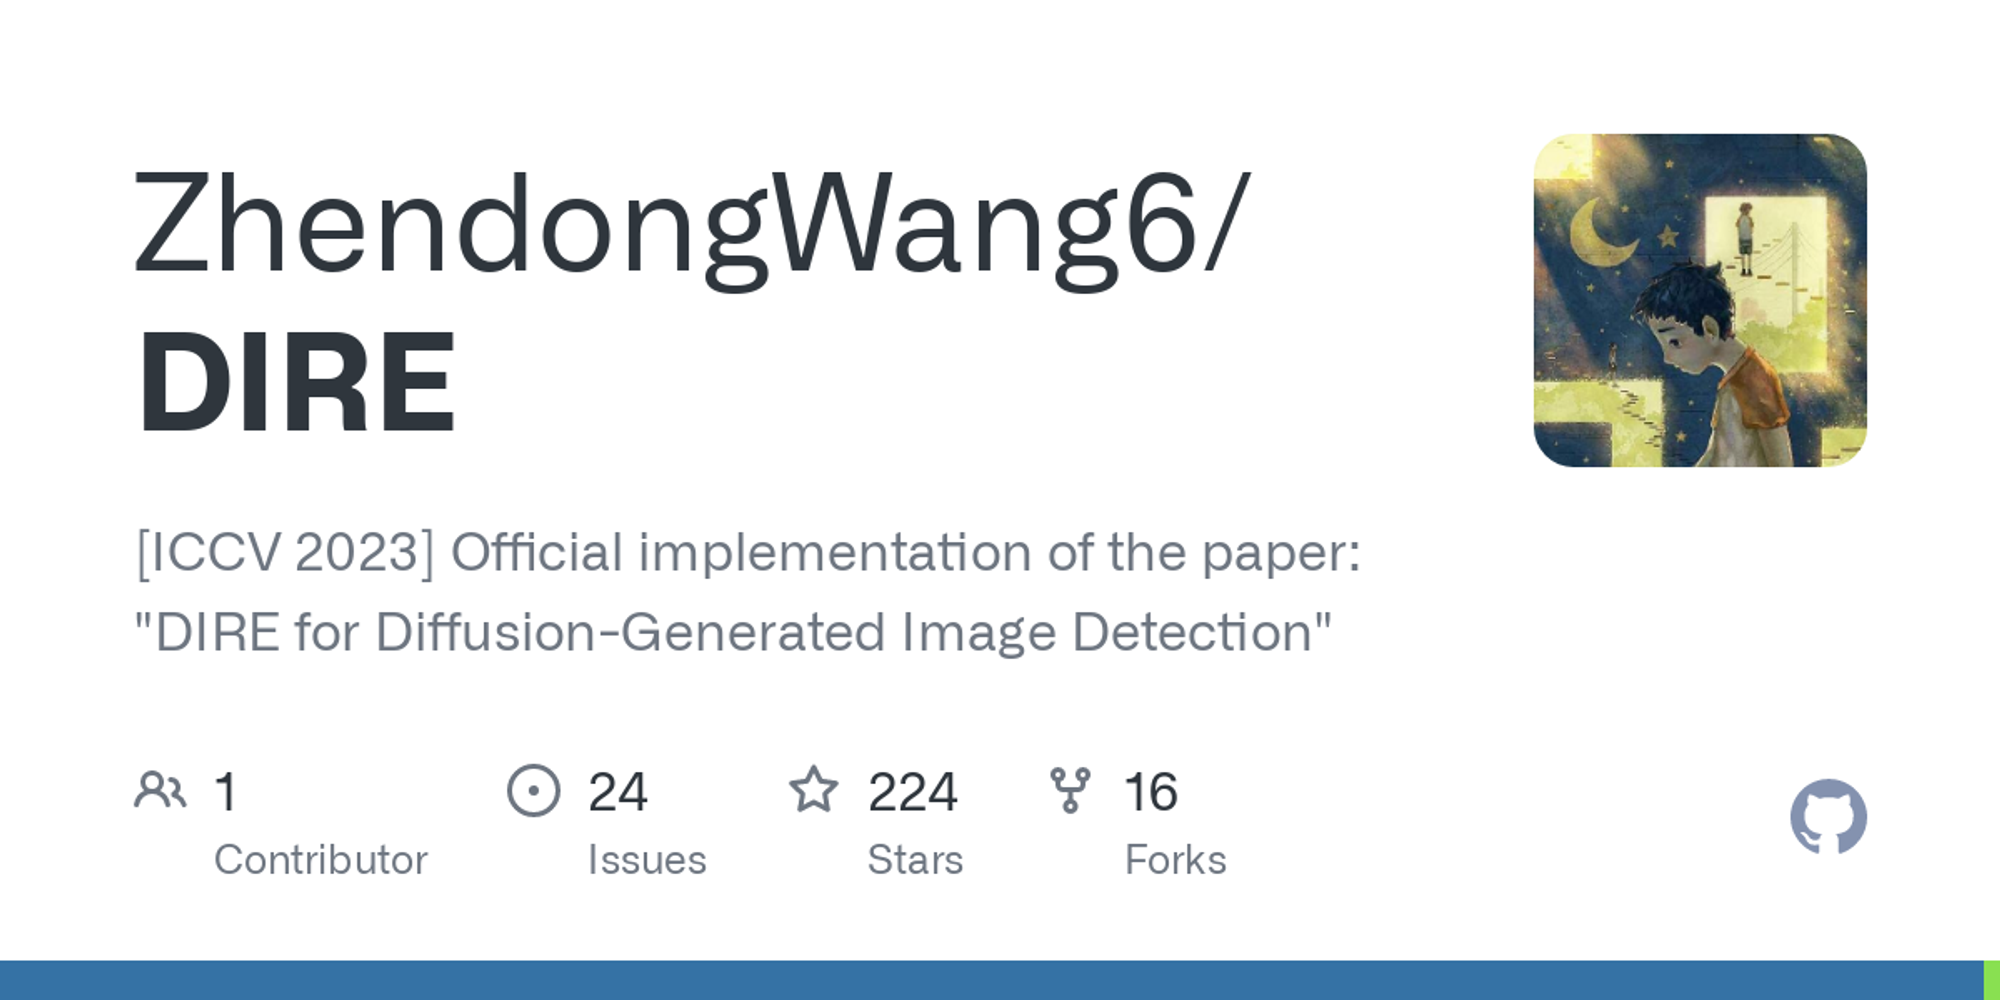 GitHub - ZhendongWang6/DIRE: Official implementation of the paper: "DIRE for Diffusion-Generated Image Detection"